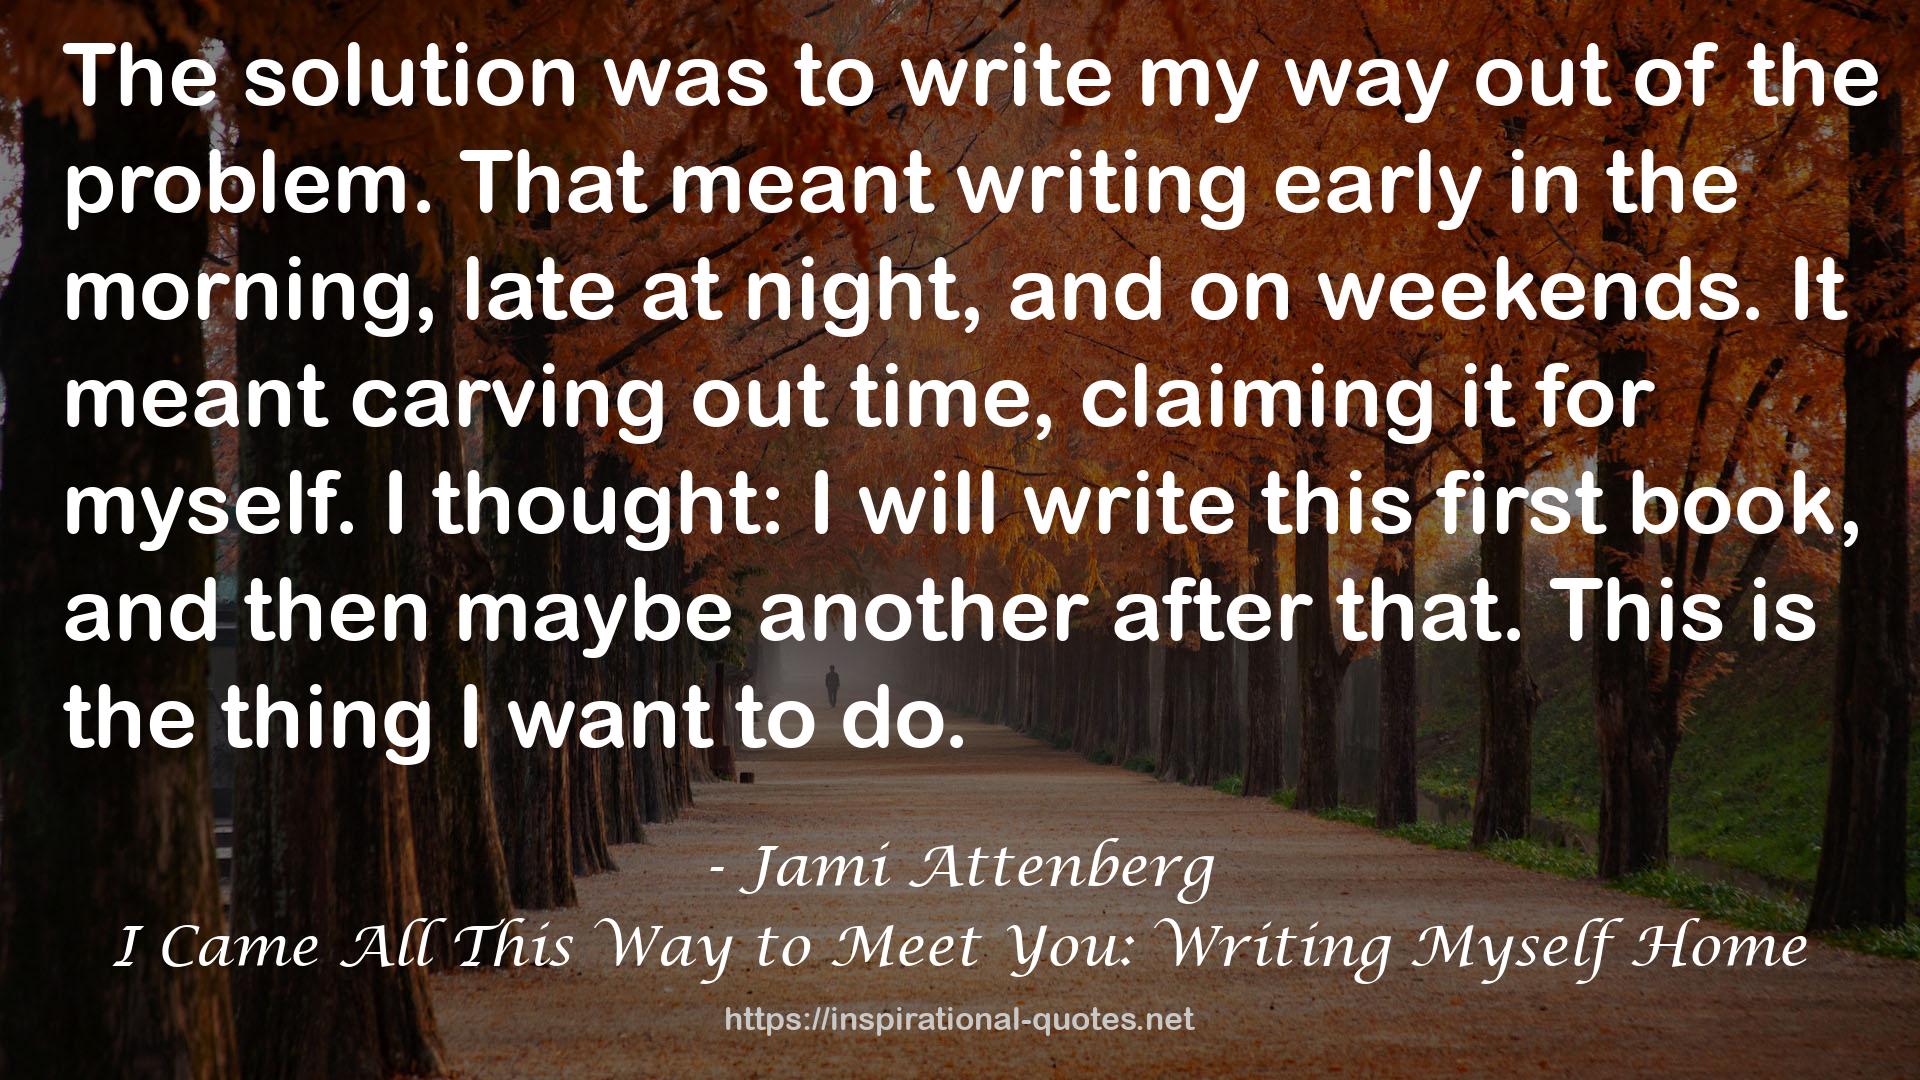 I Came All This Way to Meet You: Writing Myself Home QUOTES